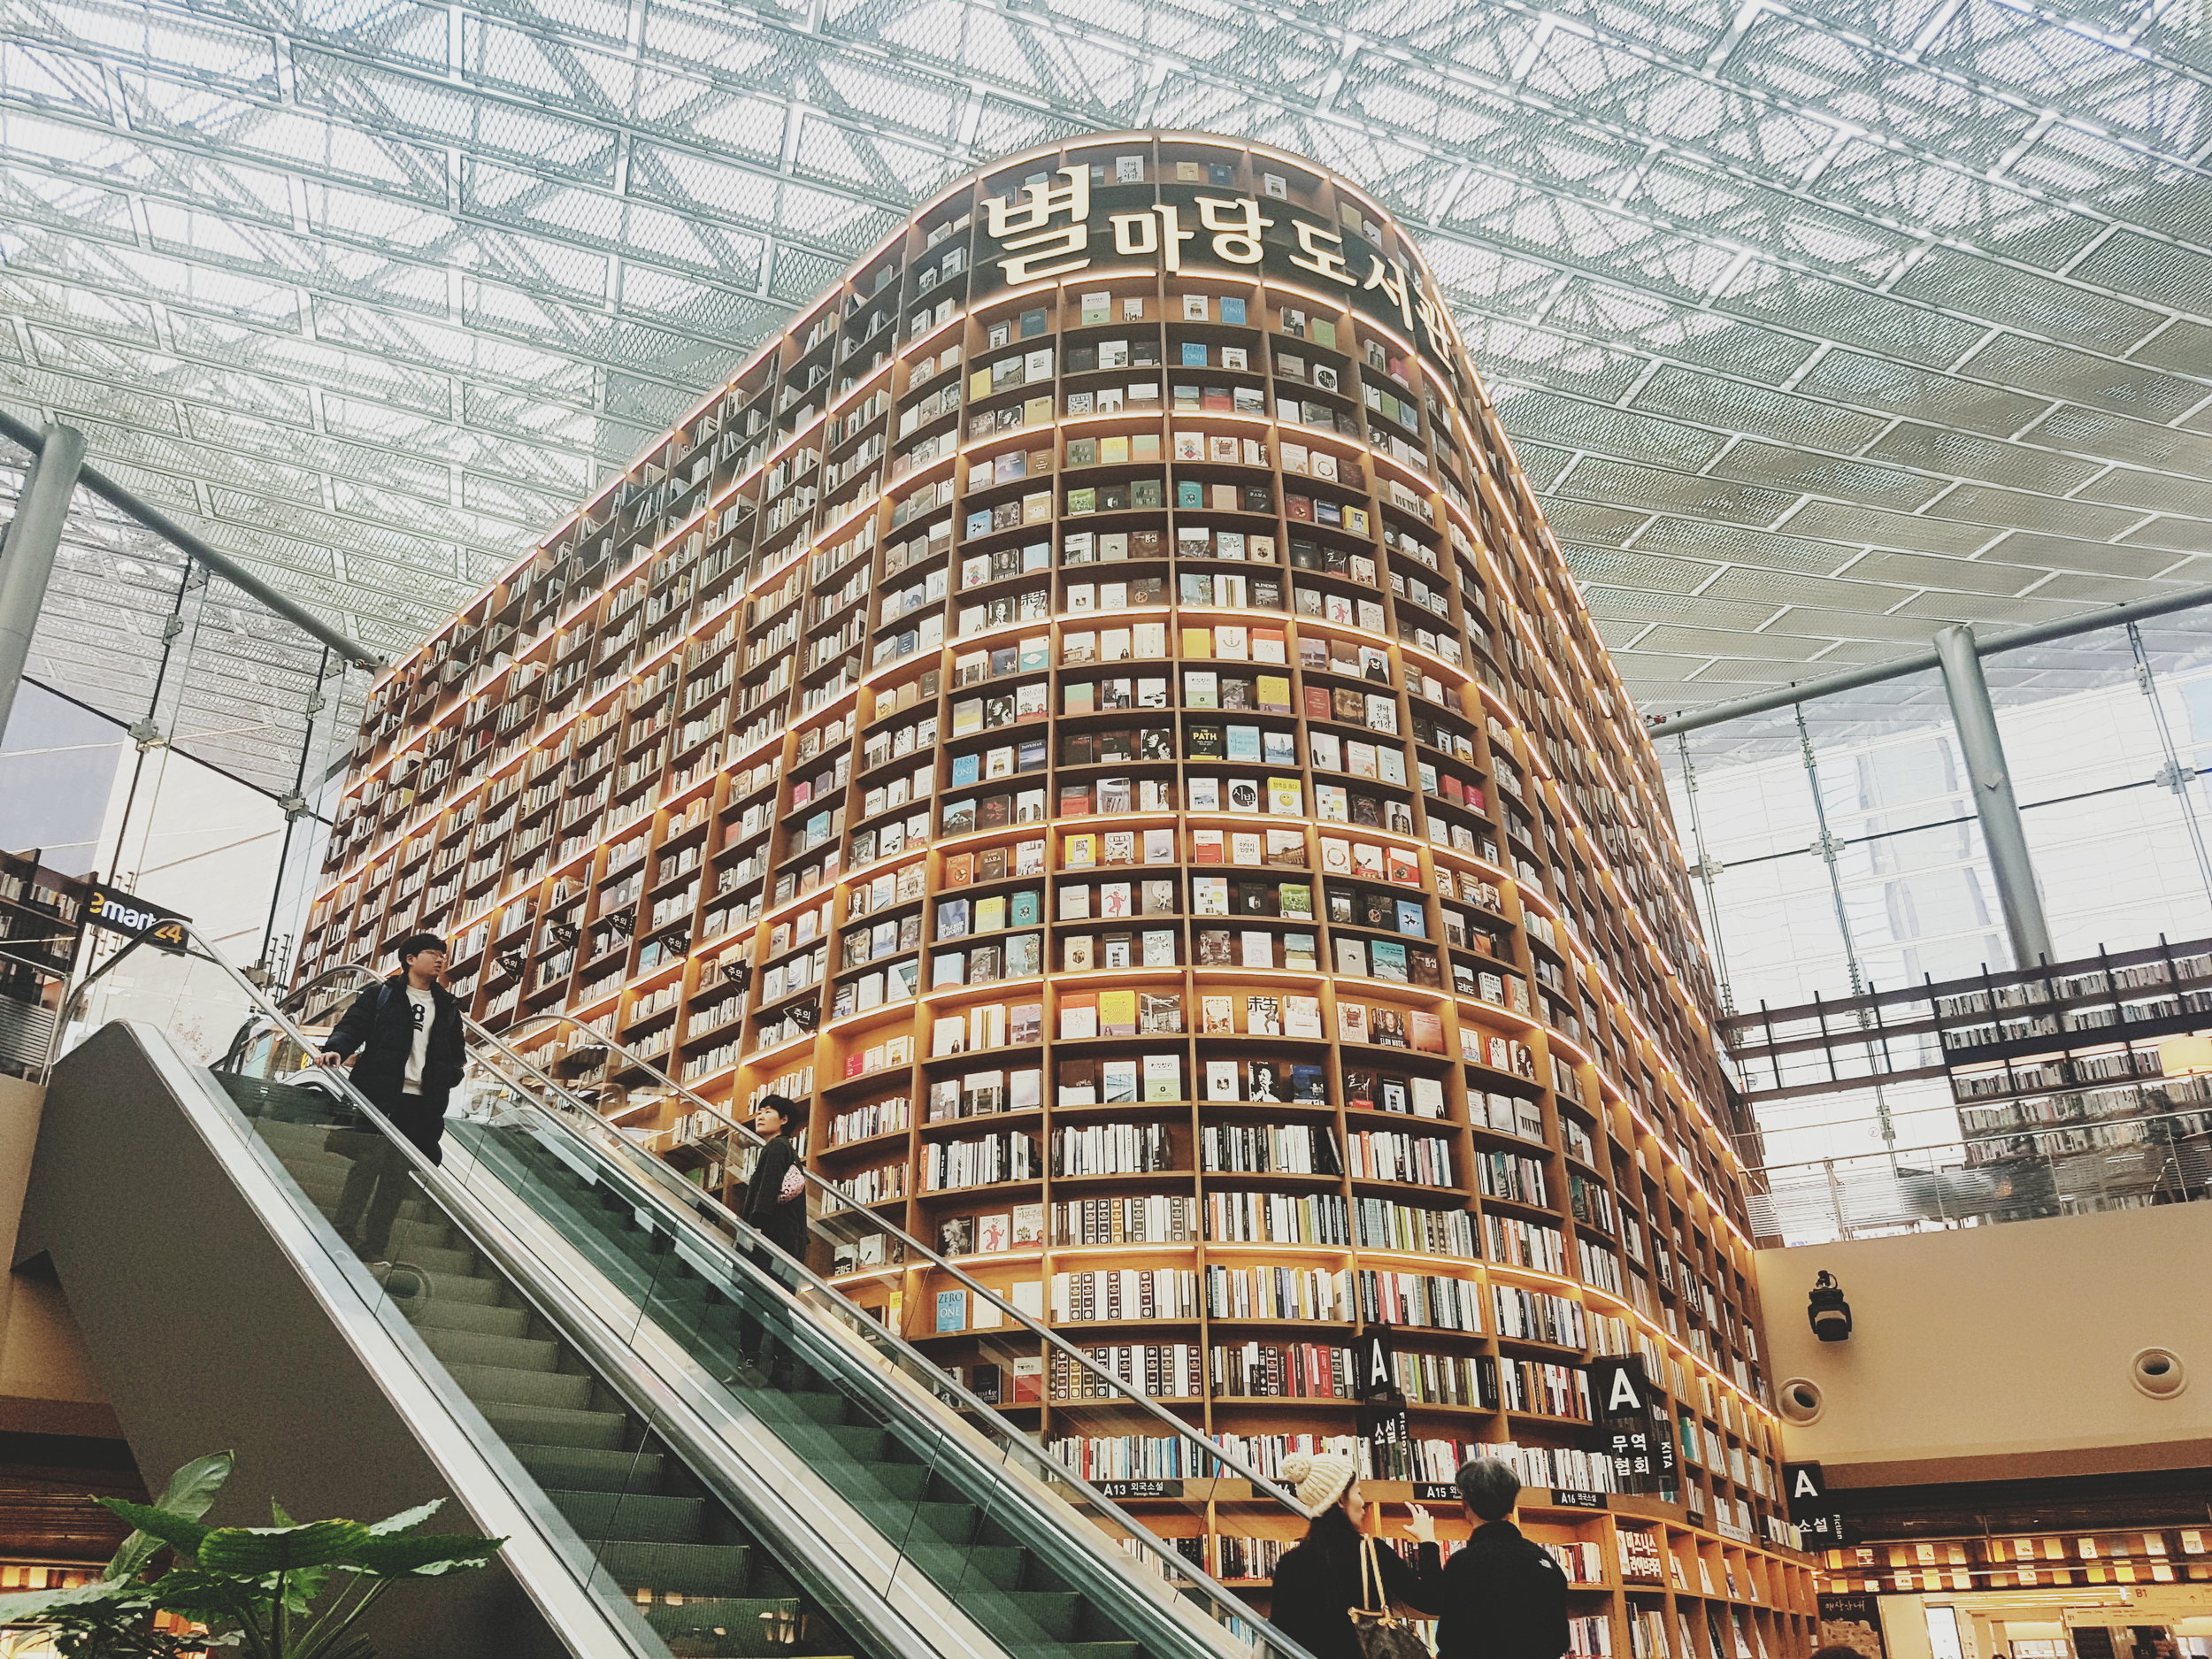 starfield library in coex mall